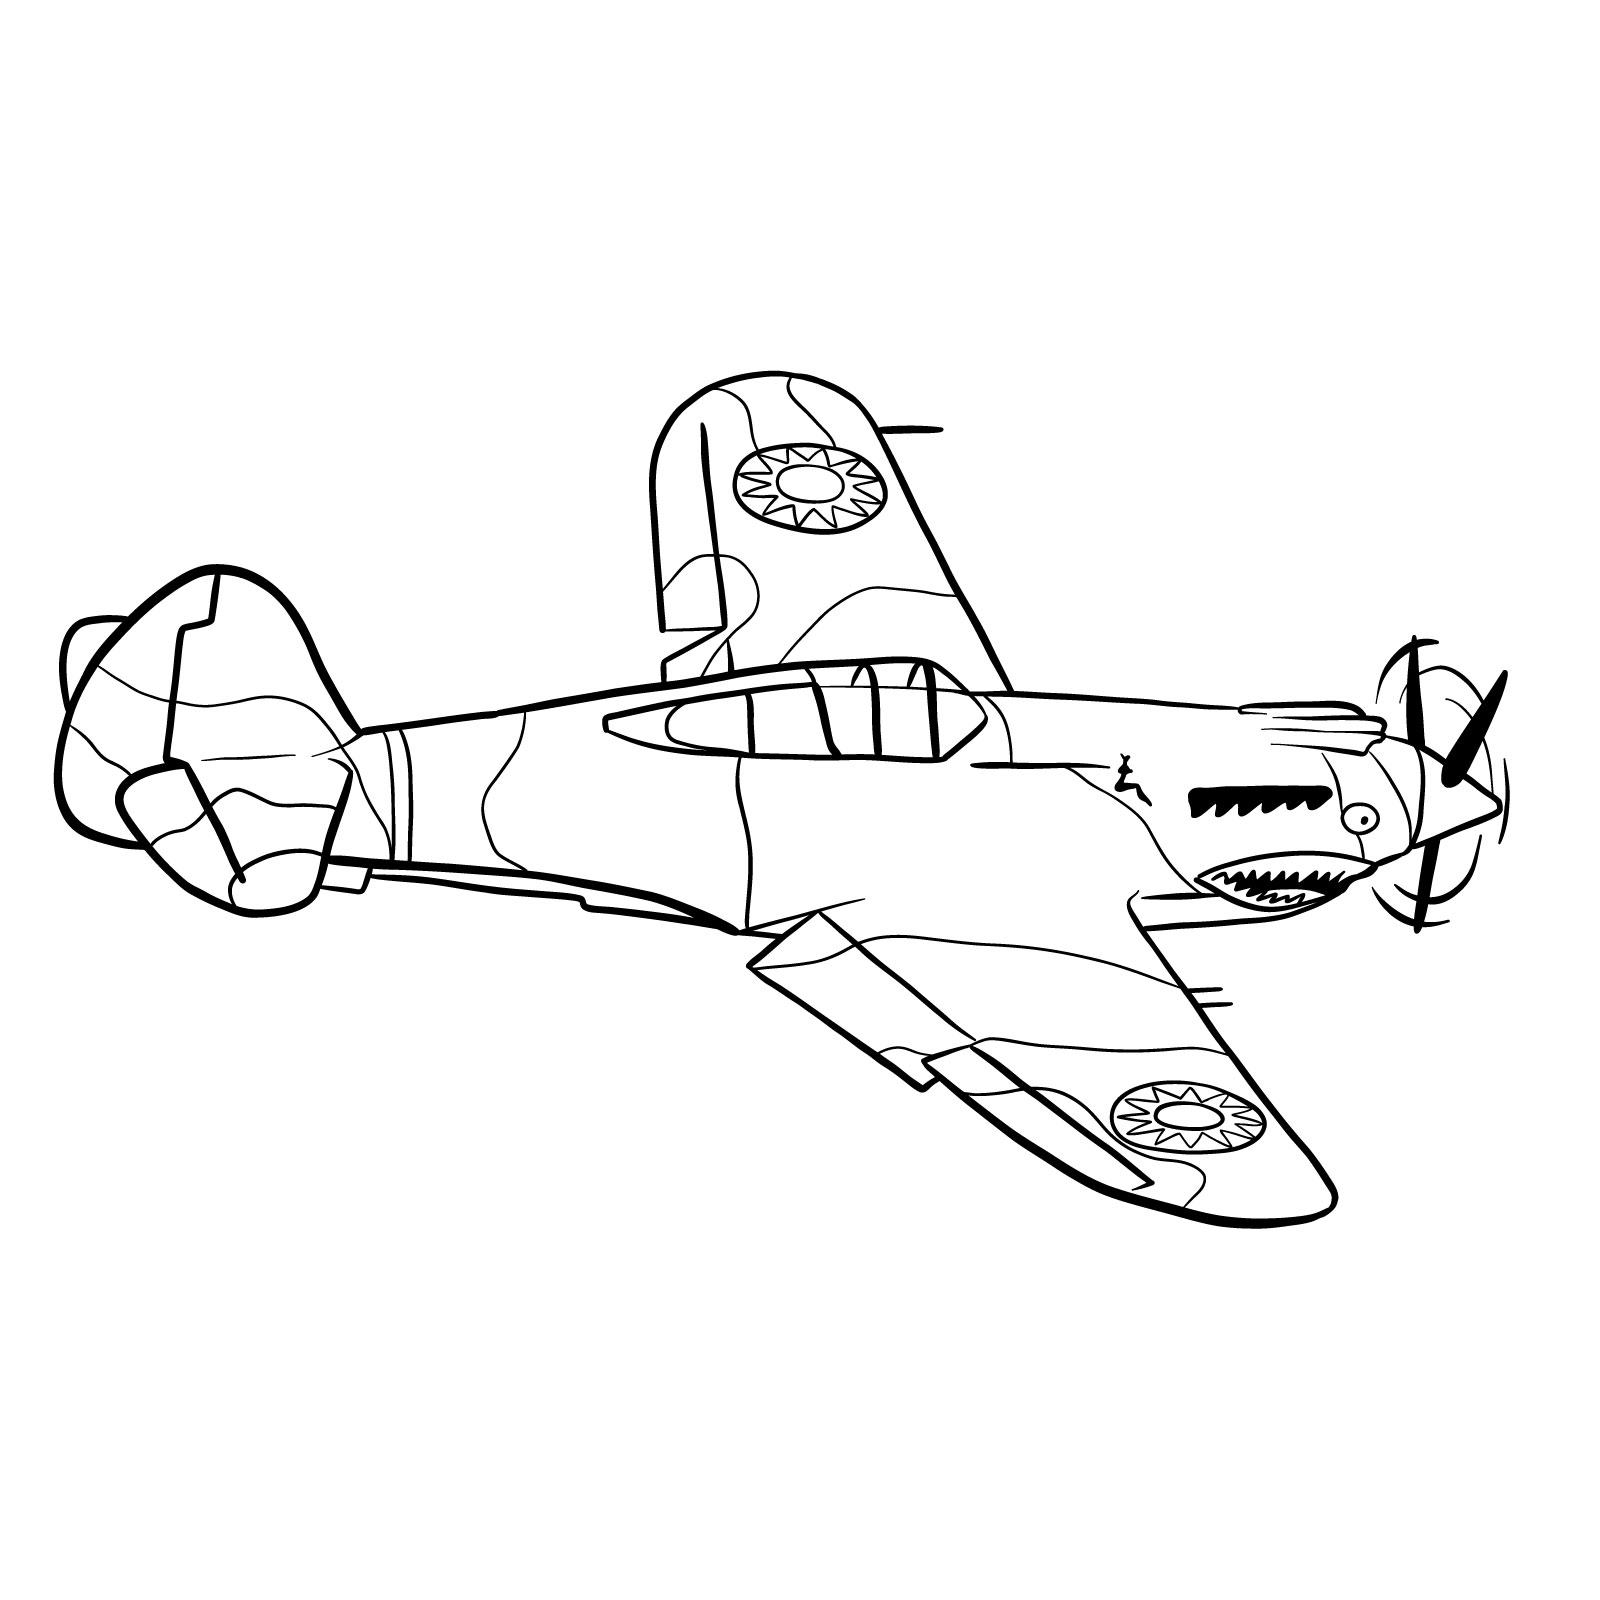 How to draw a P-40 Flying Tiger - coloring